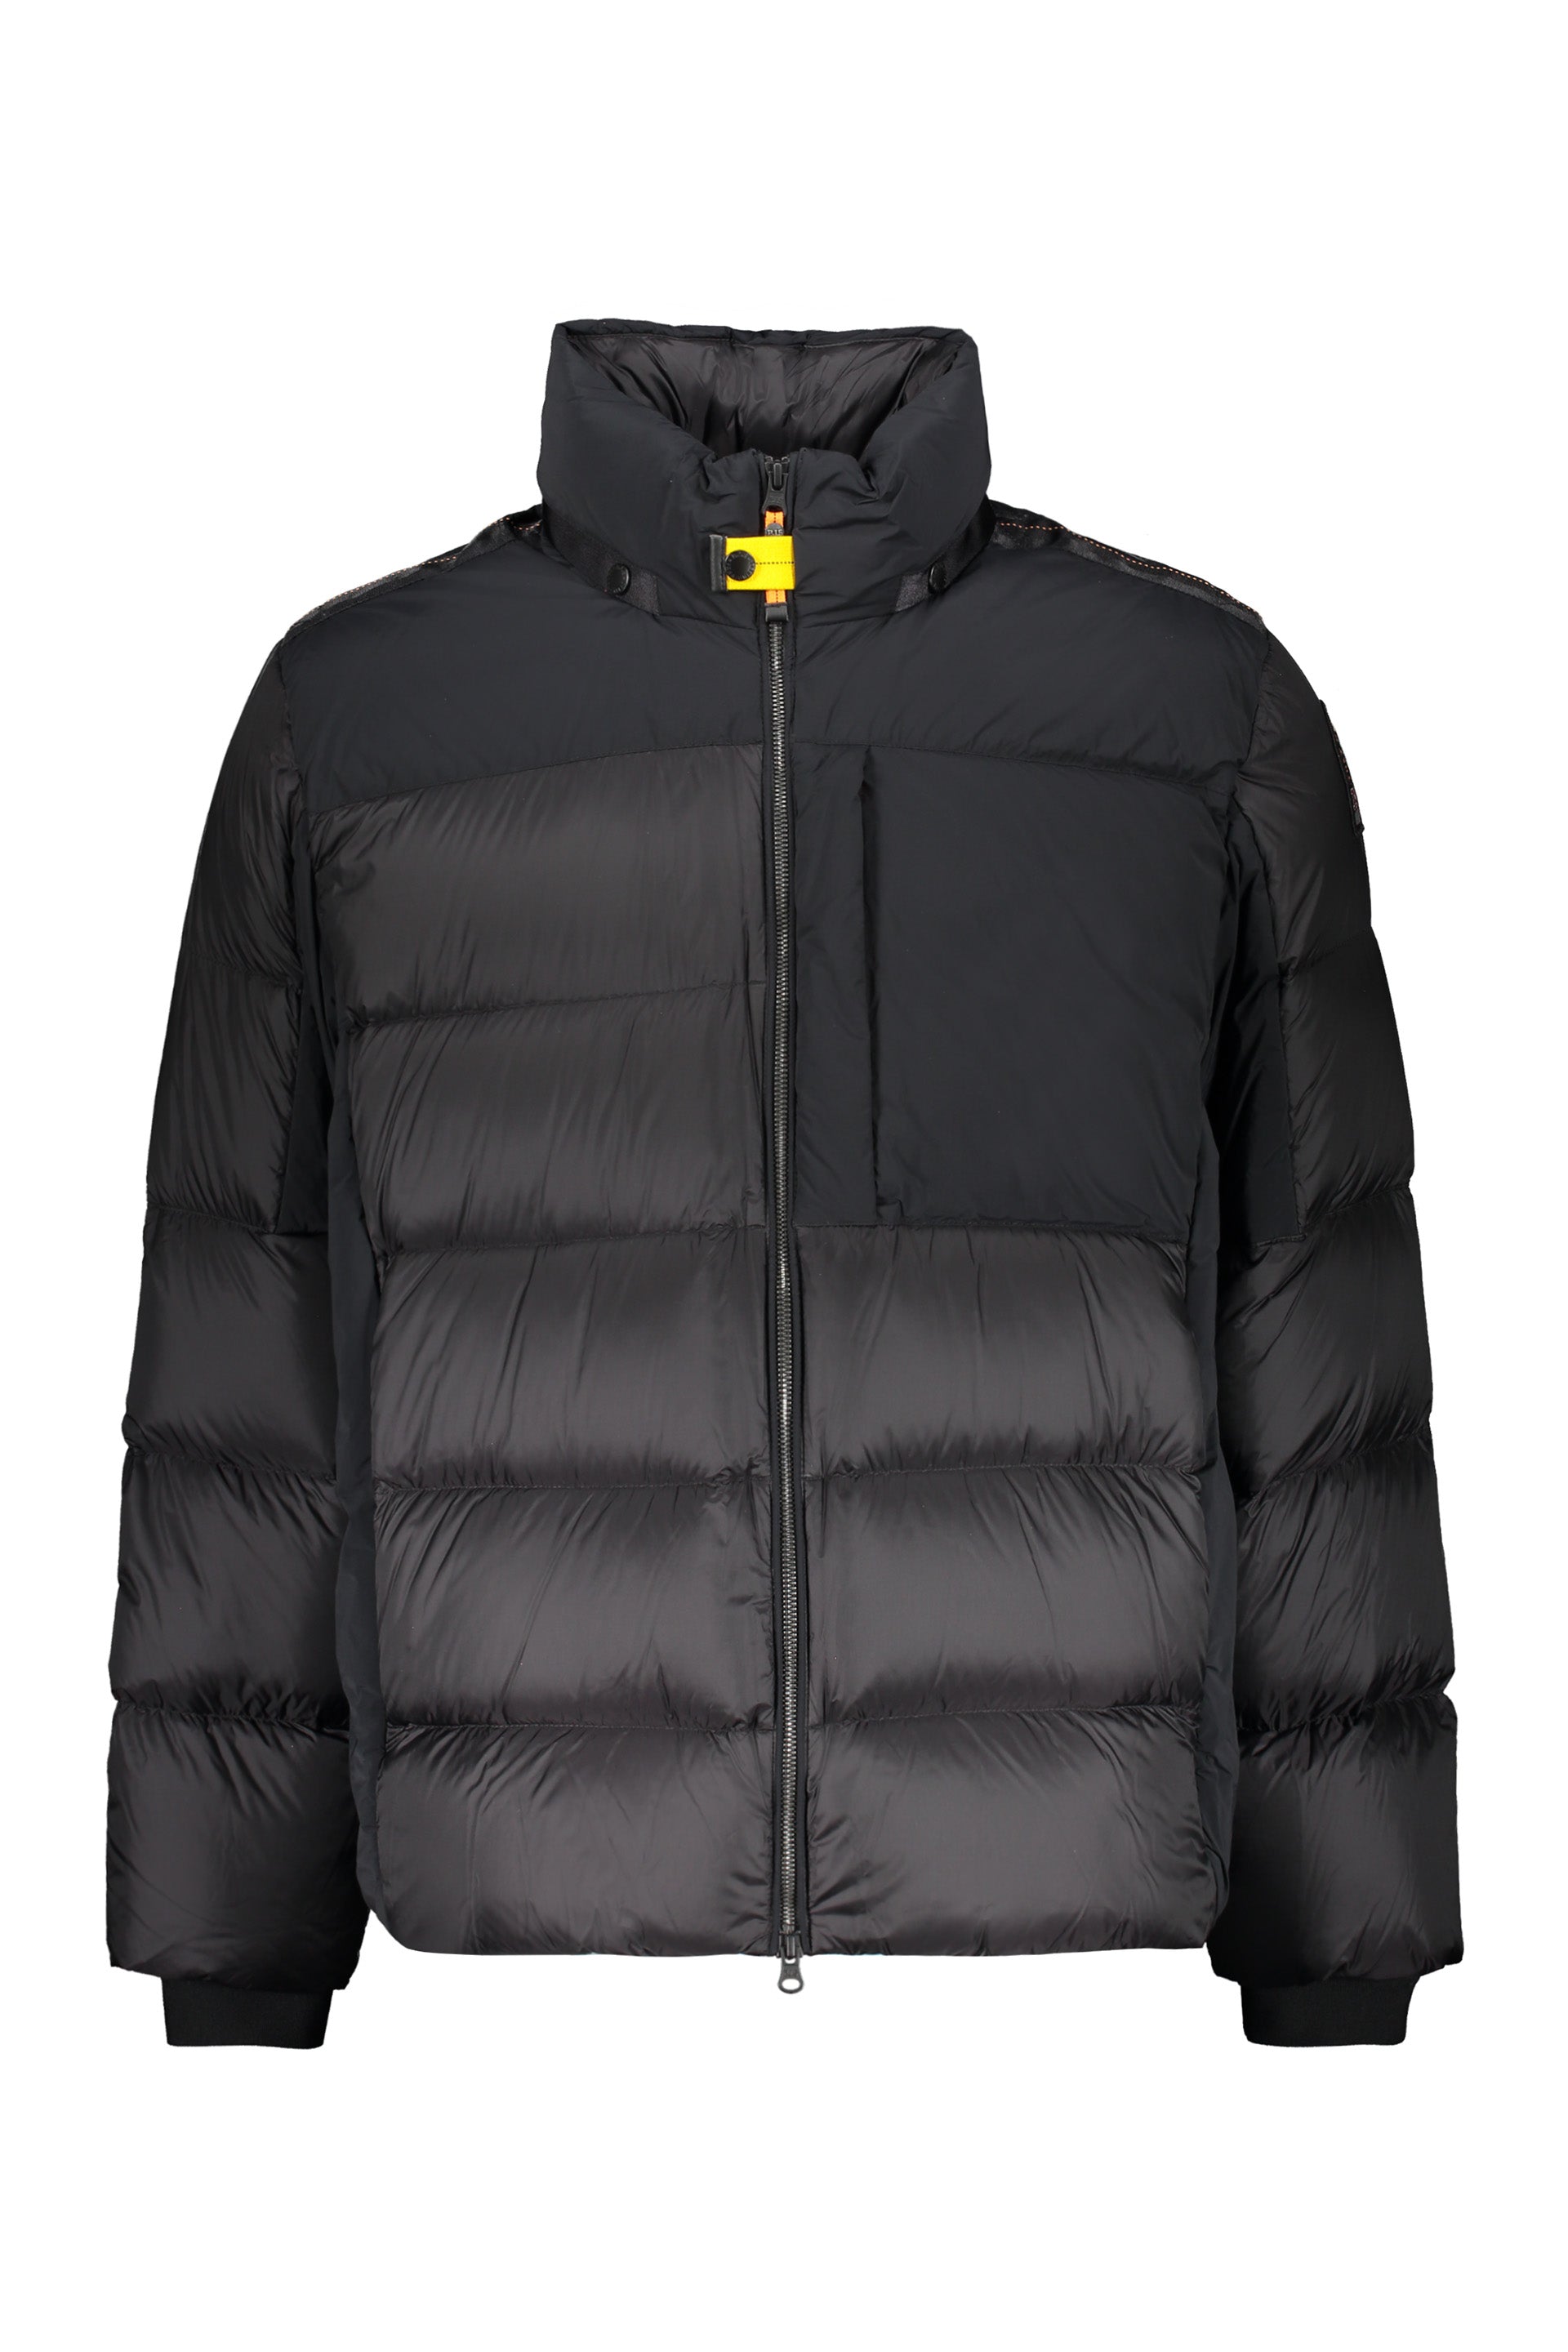 Parajumpers-OUTLET-SALE-Gover-hooded-down-jacket-Jacken-Mantel-S-ARCHIVE-COLLECTION.jpg